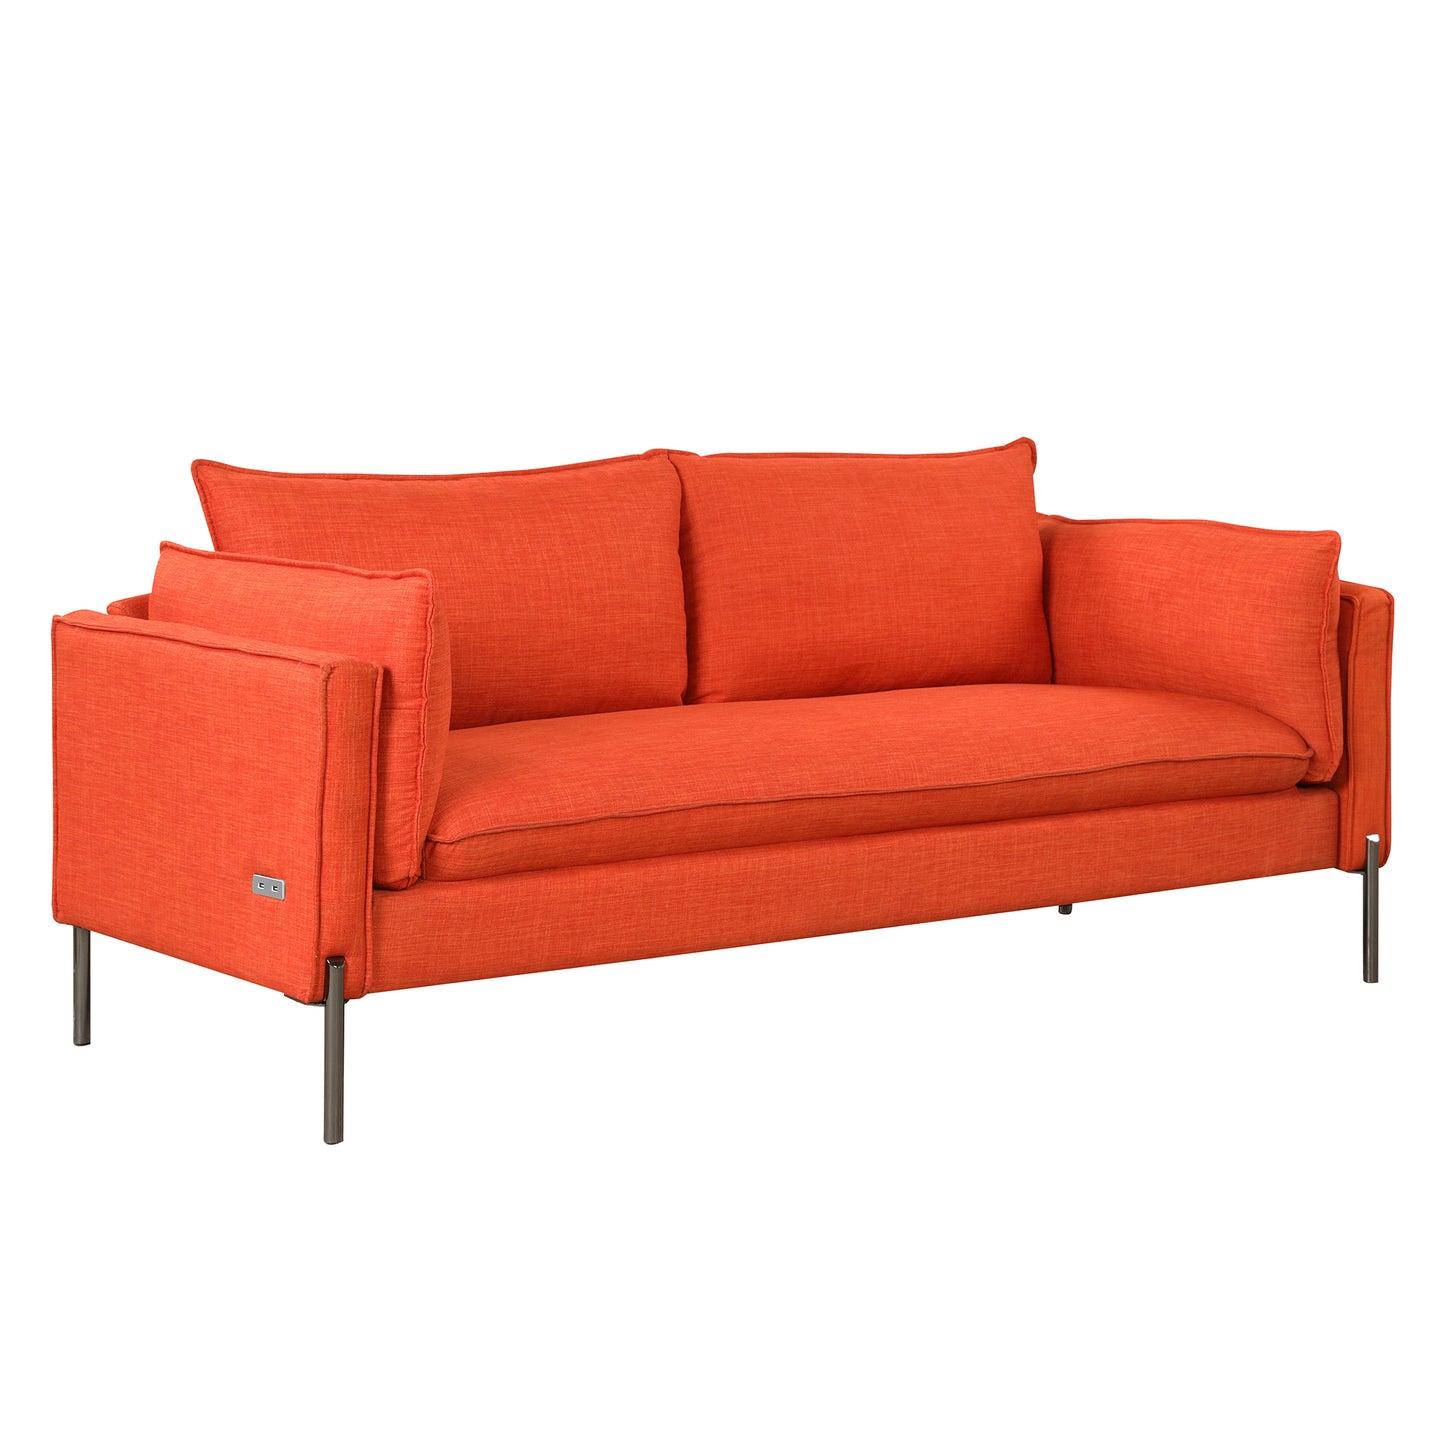 76.2" Modern Style 3 Seat Sofa  Linen Fabric Upholstered Couch Furniture 3-Seats Couch for Different Spaces,Living Room,Apartment